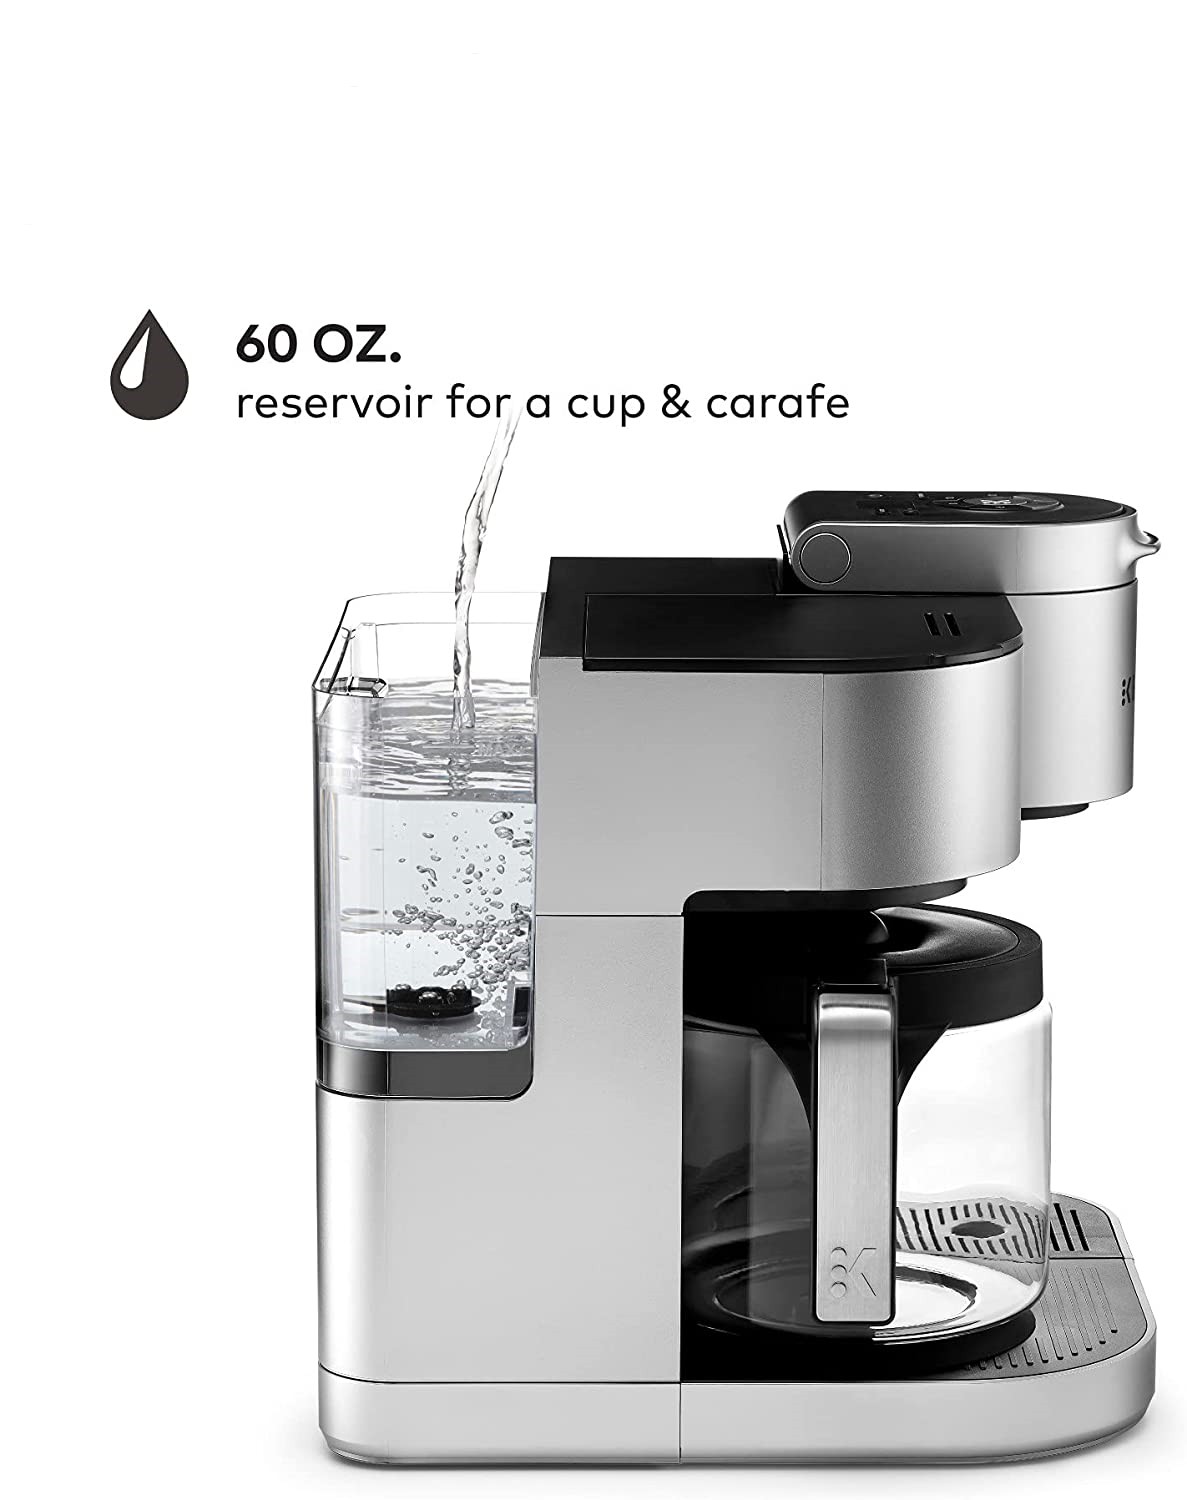 K-Duo Coffee Maker, Single Serve and 12-Cup Carafe Drip Coffee Brewer, Compatible with K-Cup Pods and Ground Coffee, Black